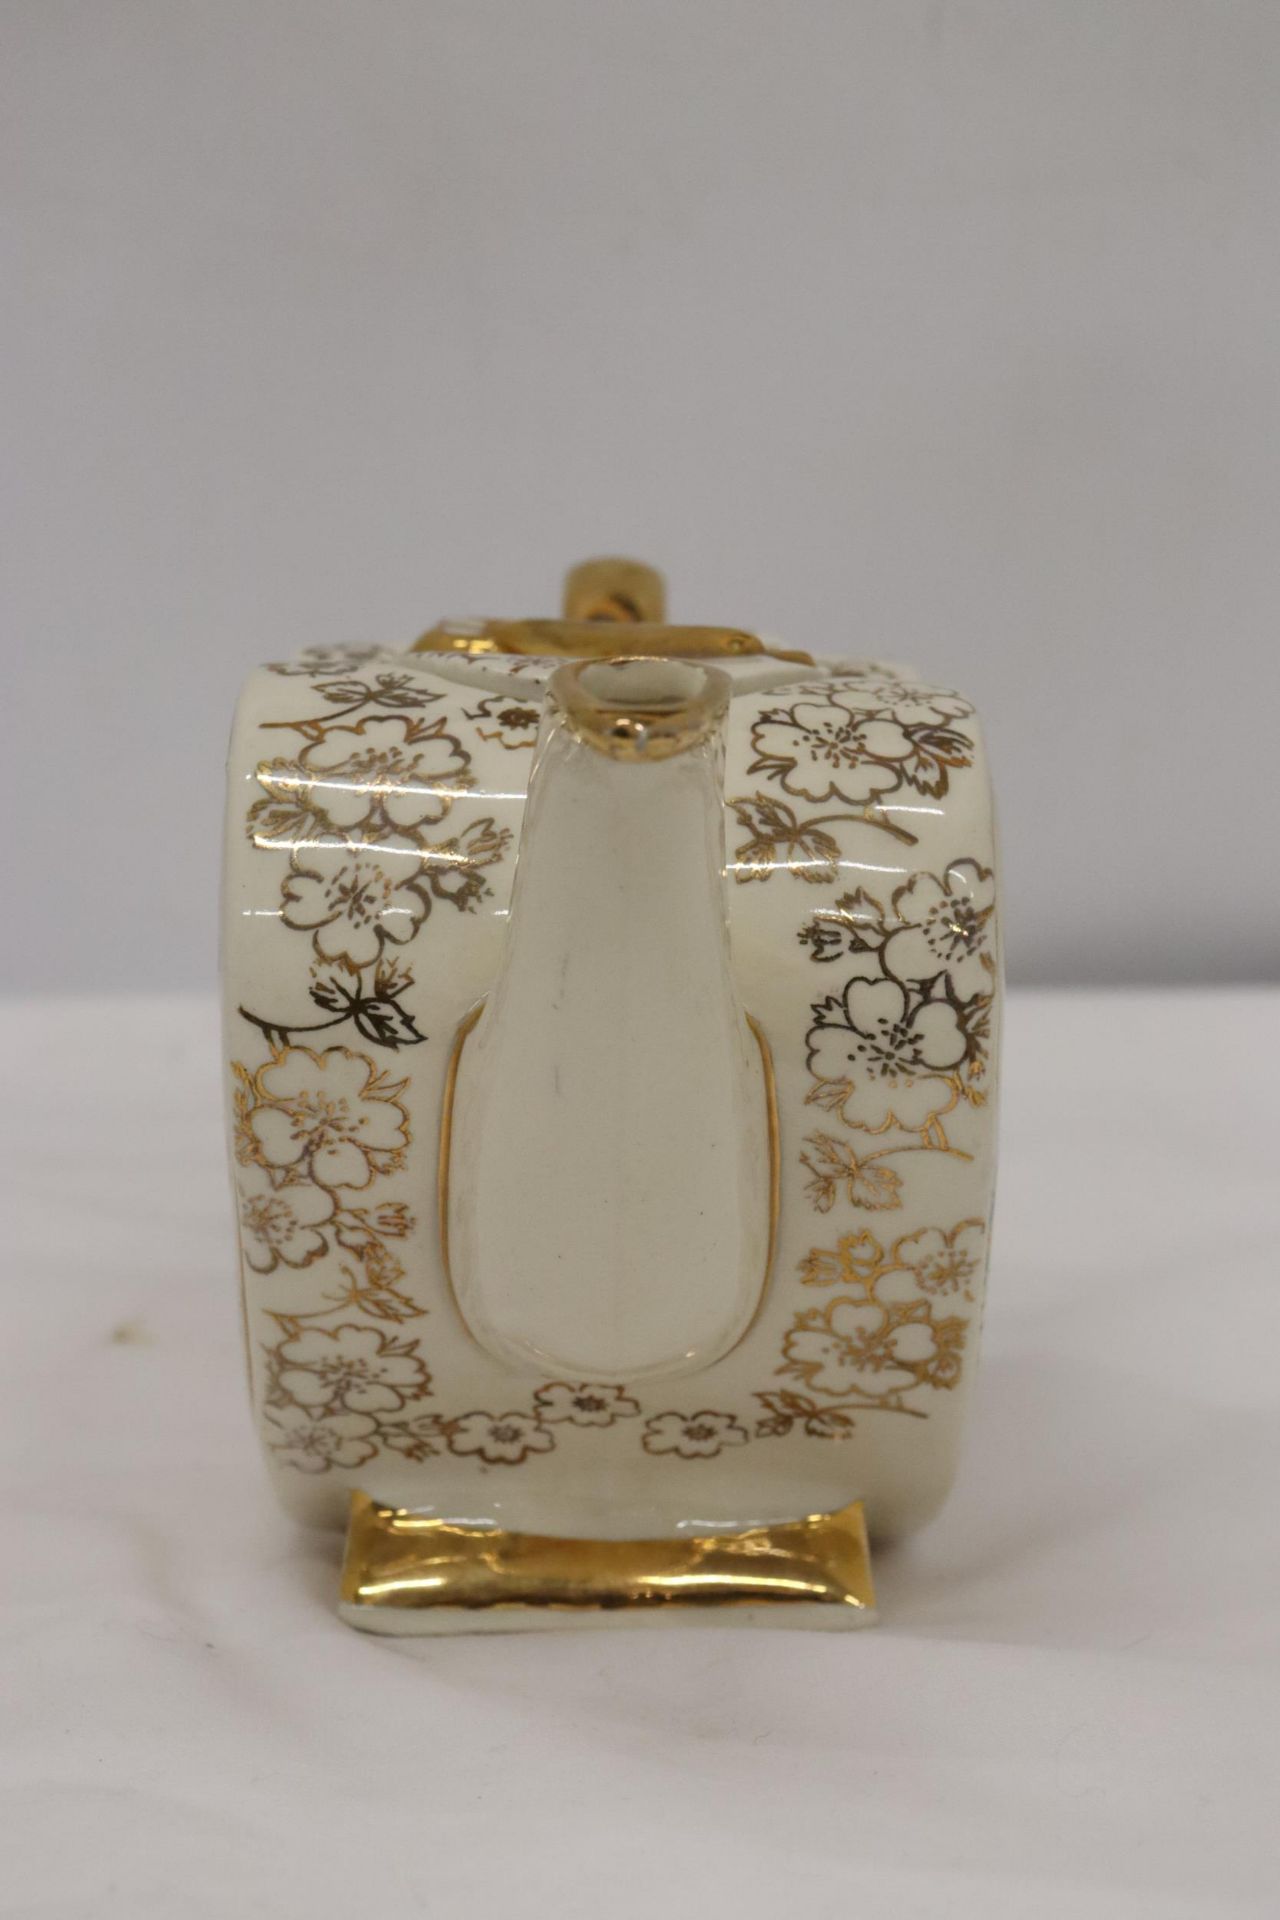 A VINTAGE HEARTSHAPED TEAPOT LINGARD WEBSTER "KEY TO MY HEART" - Image 4 of 6